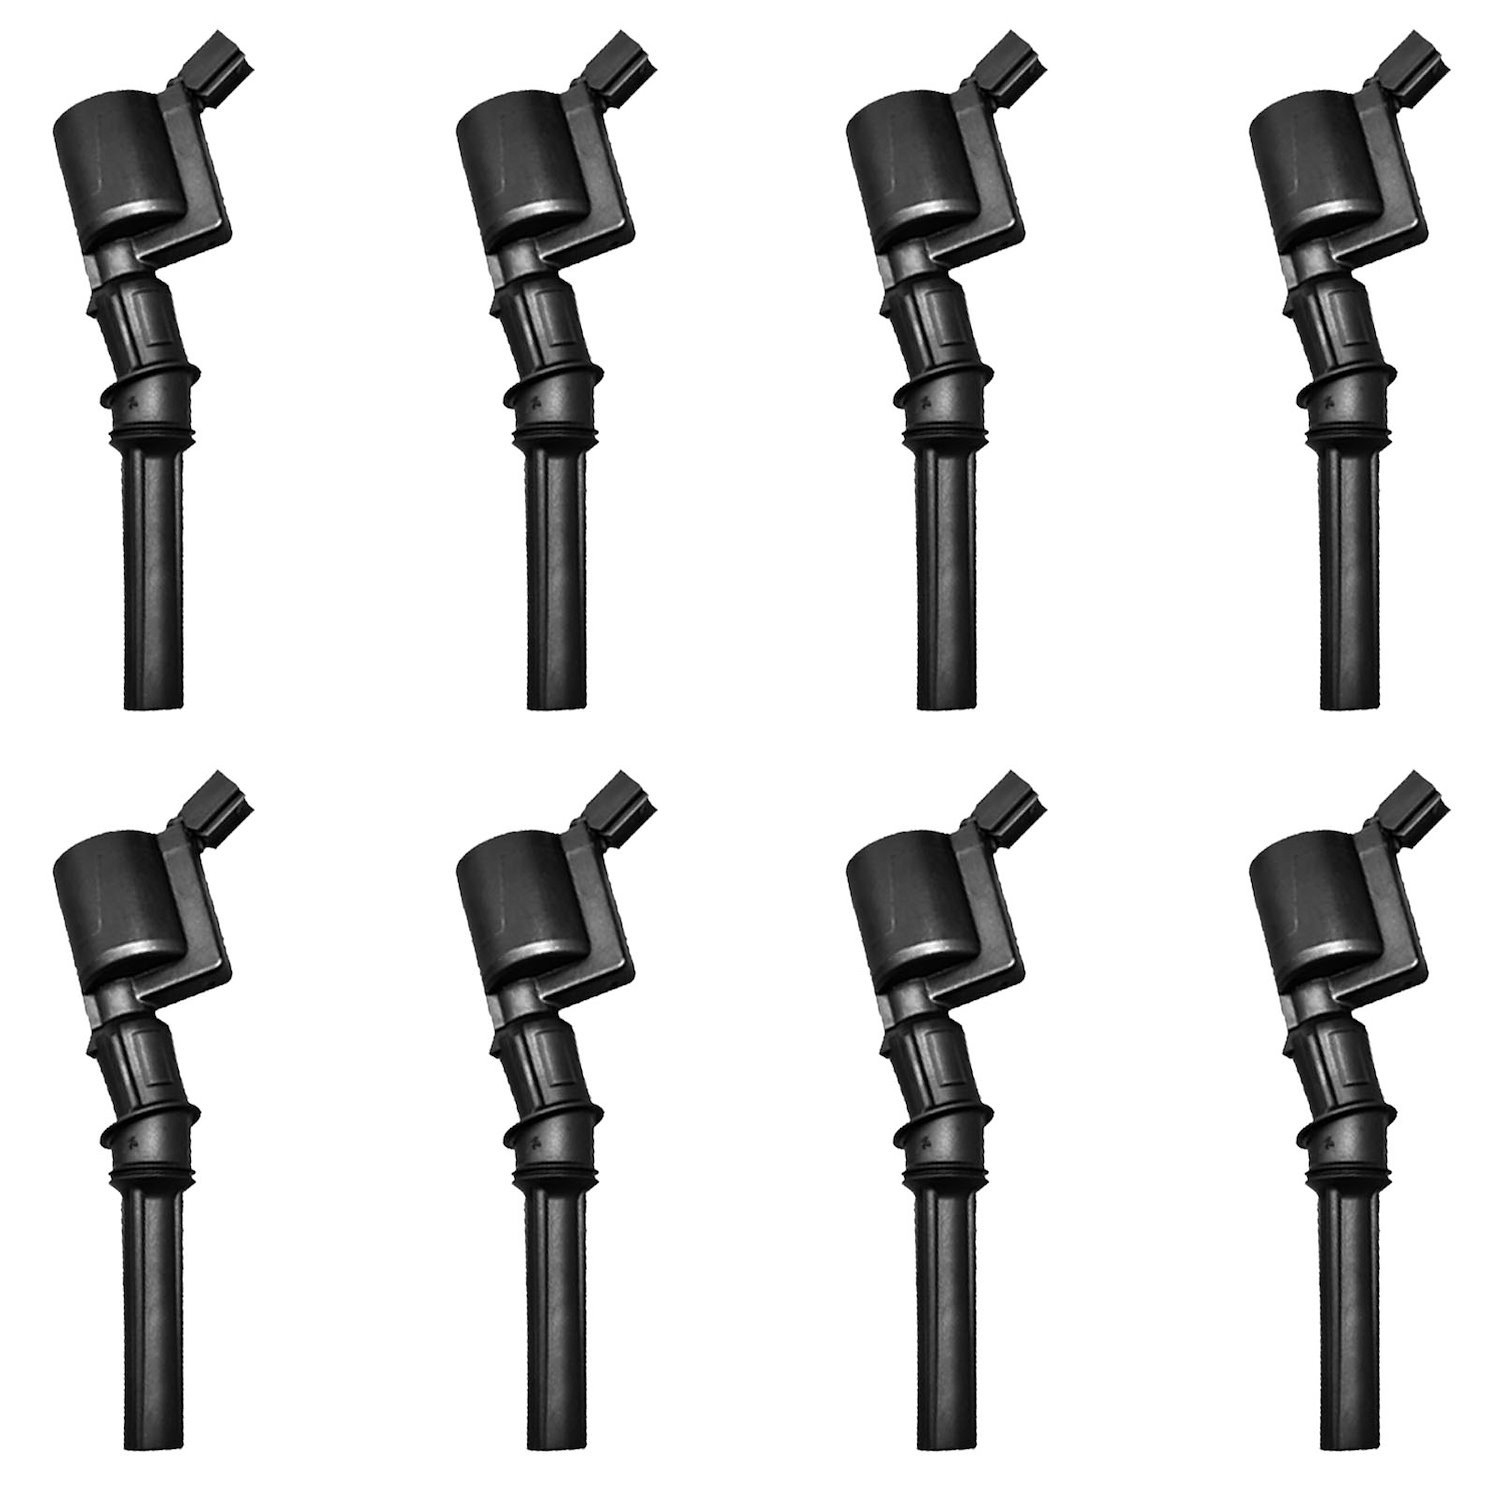 OE Replacement Ignition Coils for 1998-2008 Ford